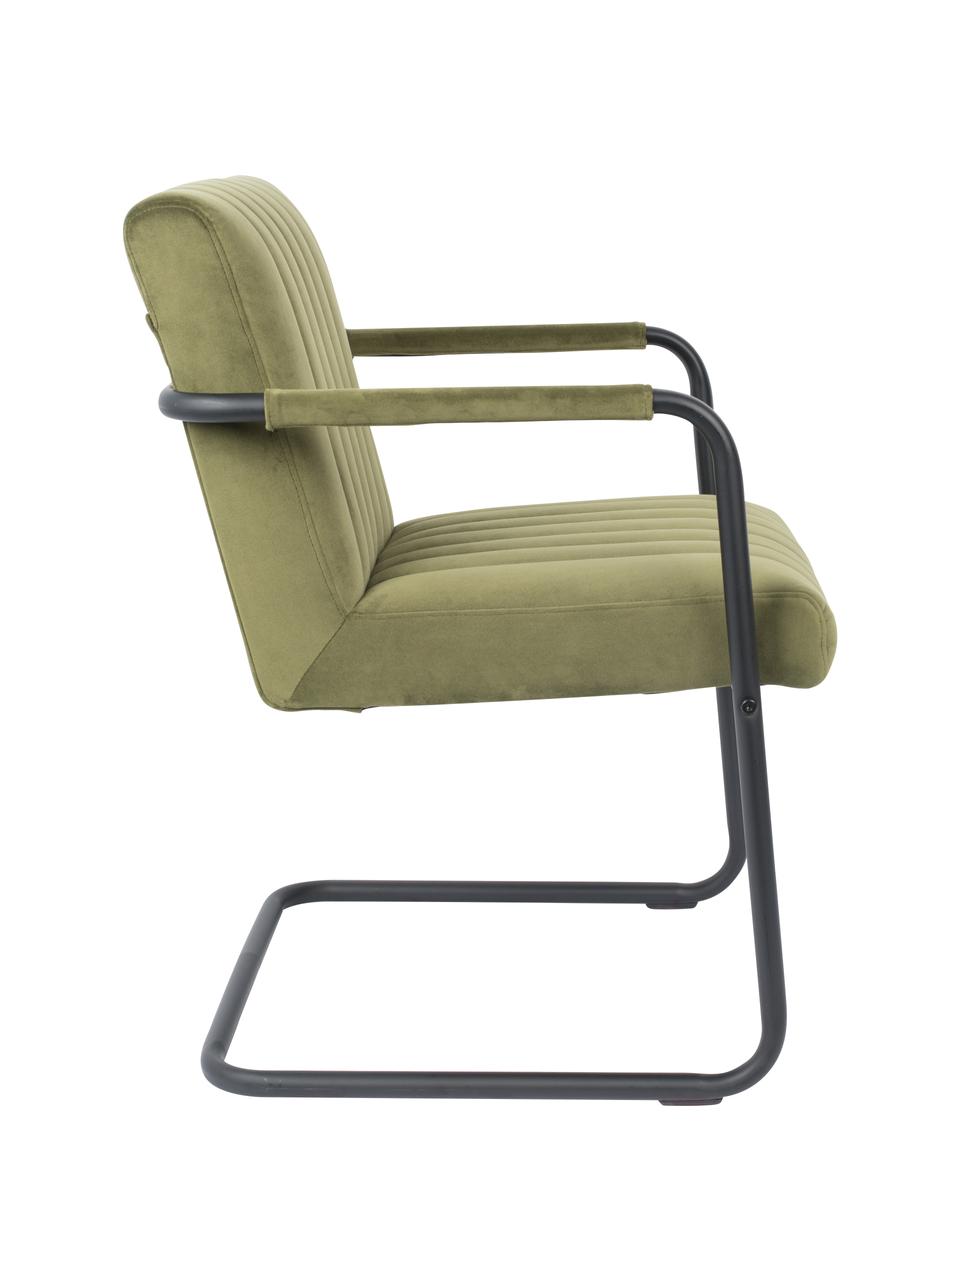 Chaise cantilever en velours Stitched, Vert olive